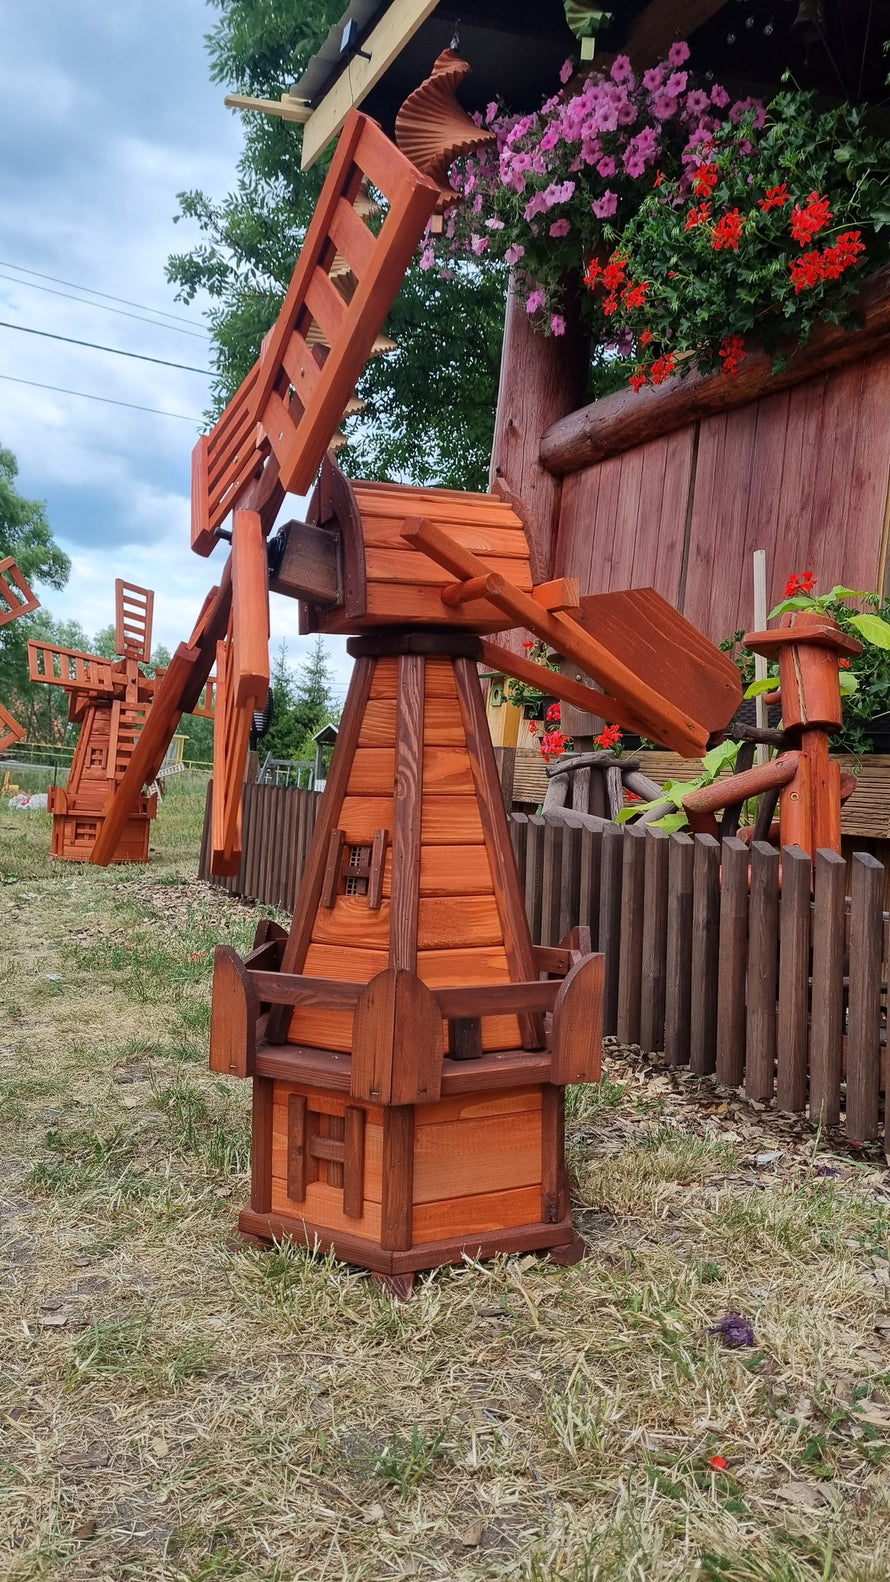 Handcrafted wooden windmills - rustic garden decor that adds charm and movement to your outdoor space from Pendle Windmills